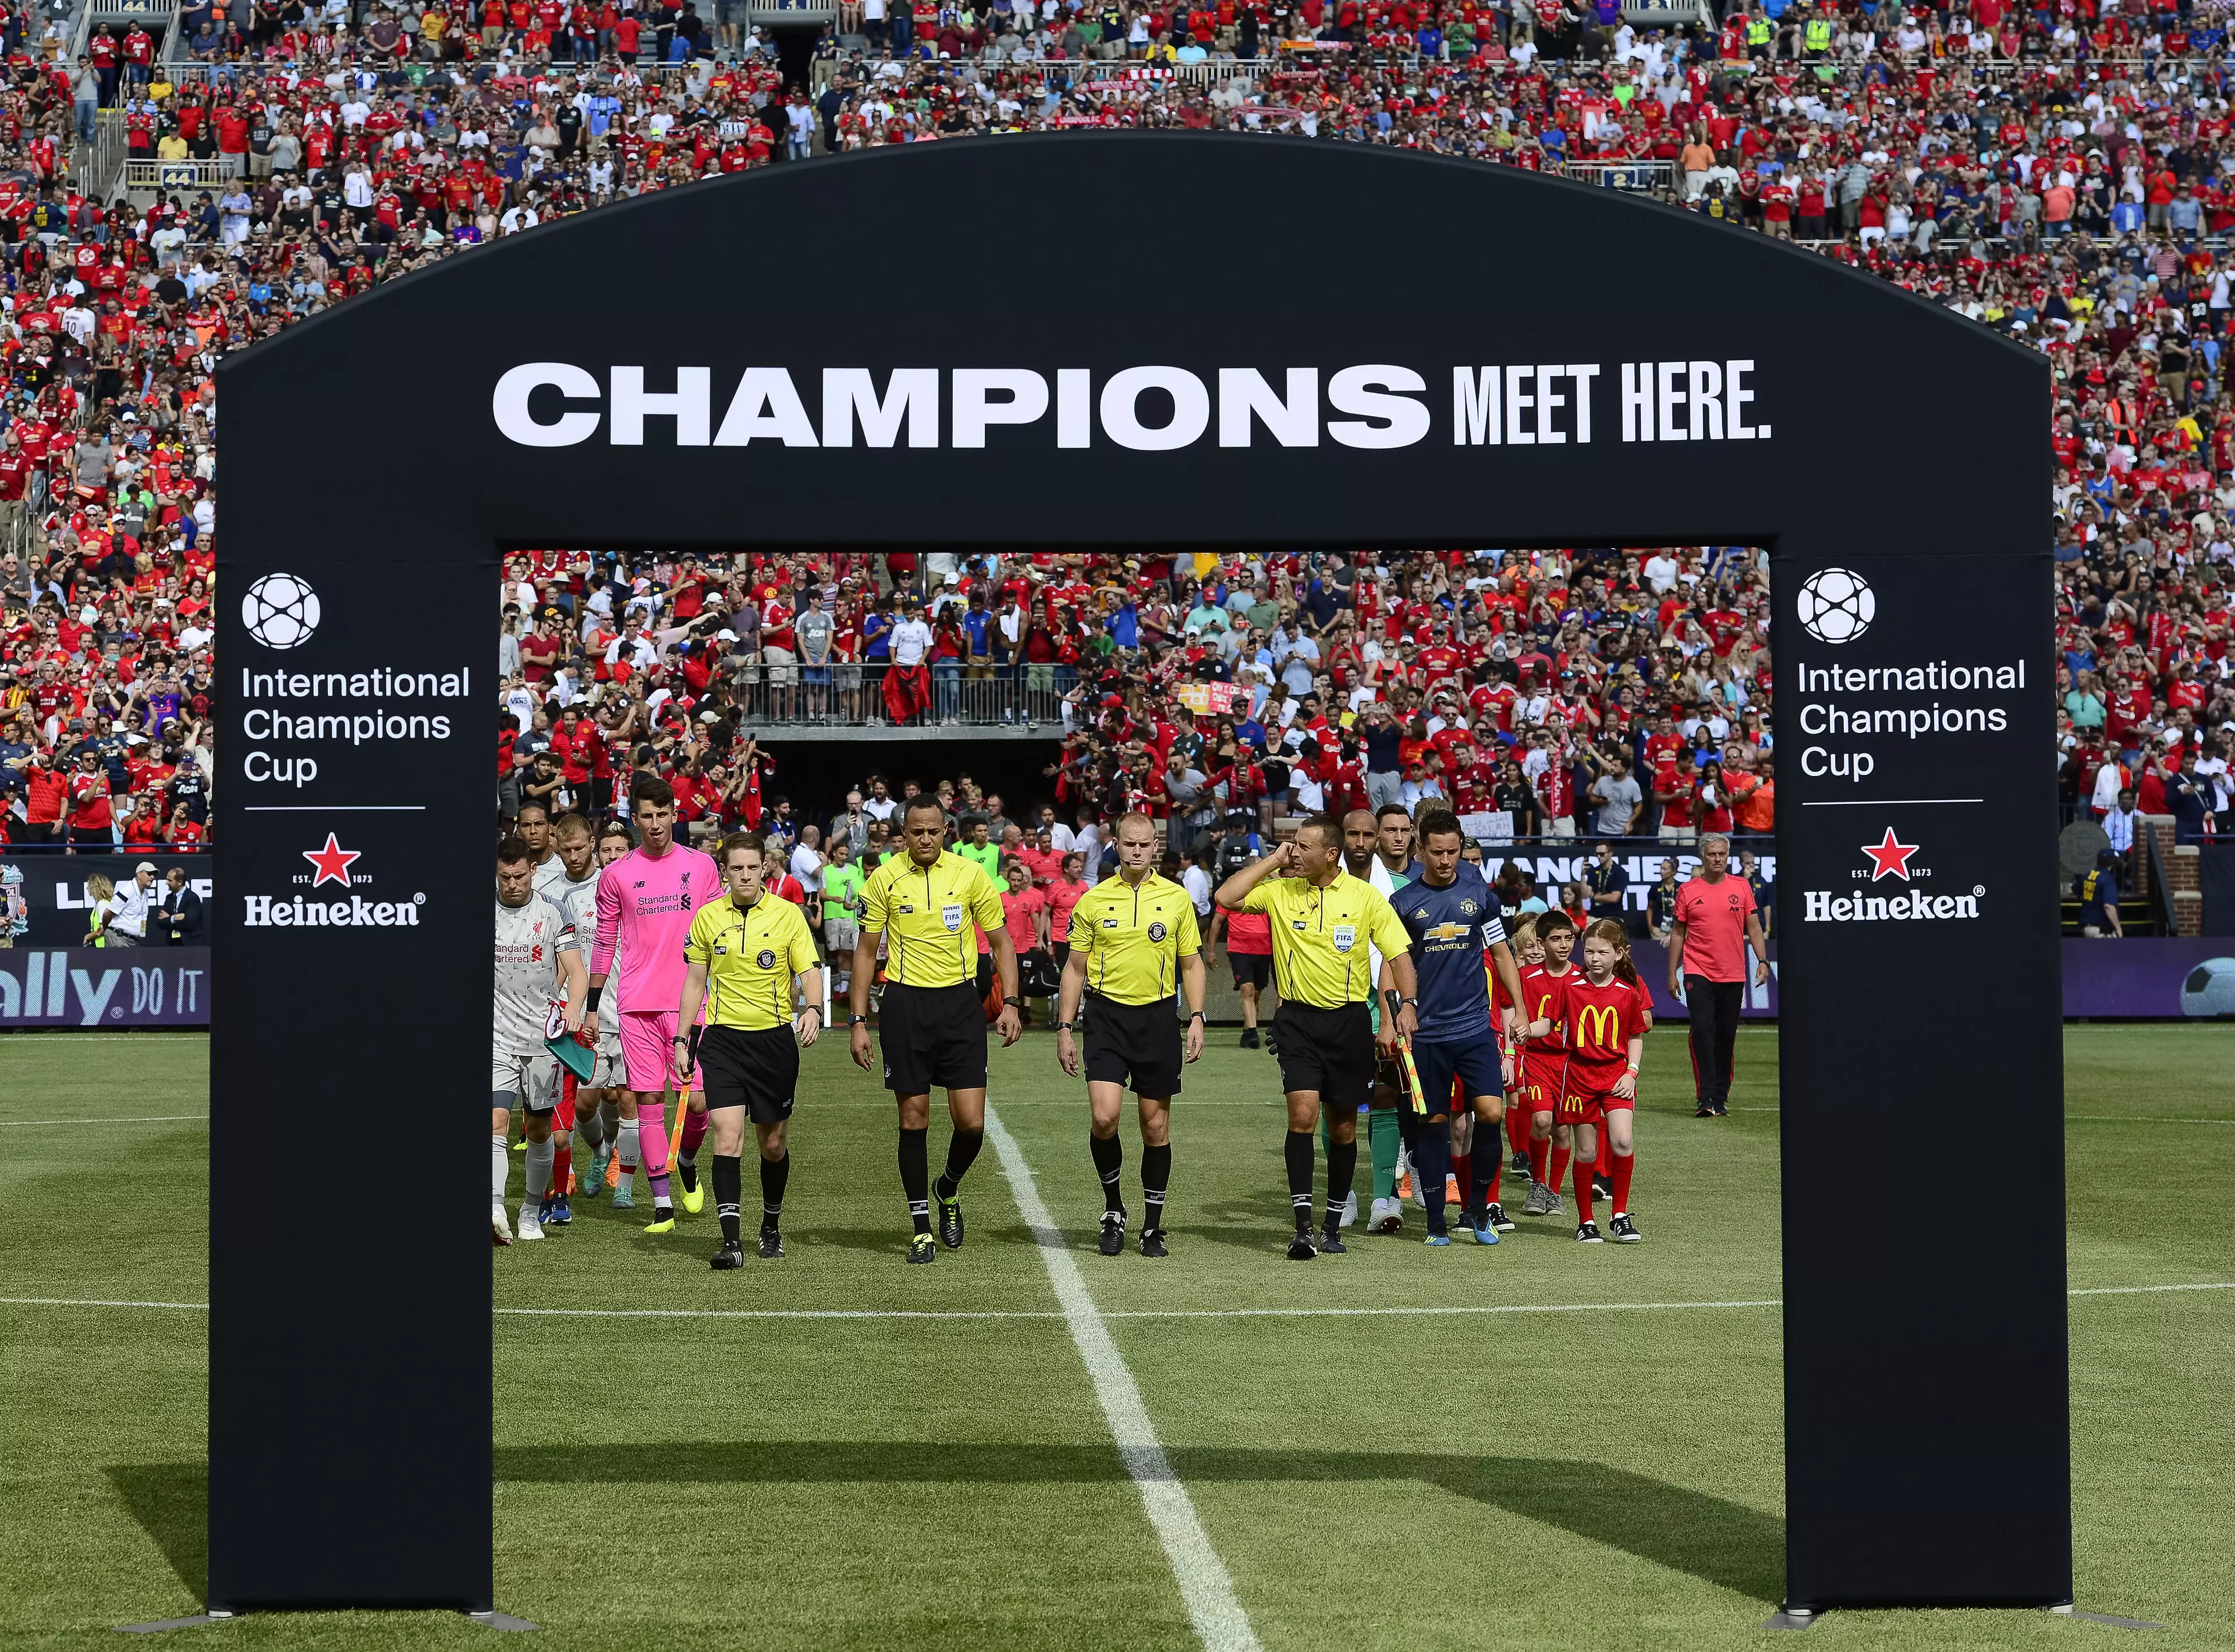 Full stadiums in the U.S for the International Champions Cup pre season tournament has proved the worldwide appeal of Europe's biggest names. Image: PA Images